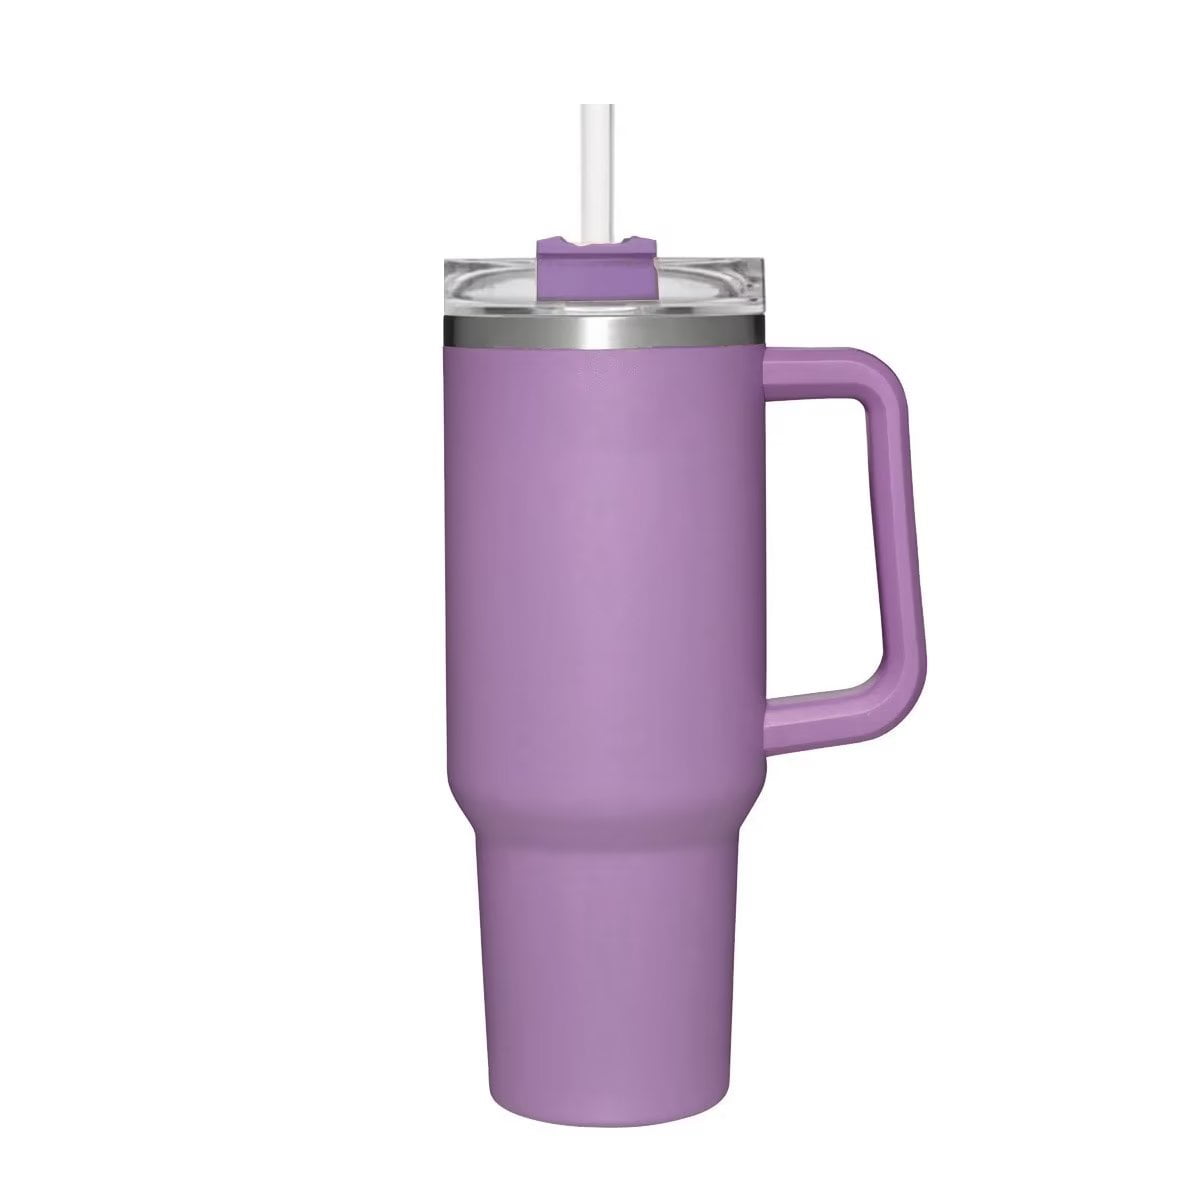 Stanley Quencher H2.0 Soft Matte Collection, Stainless Steel Vacuum  Insulated Tumbler with Lid and Straw for Iced and Cold Beverages